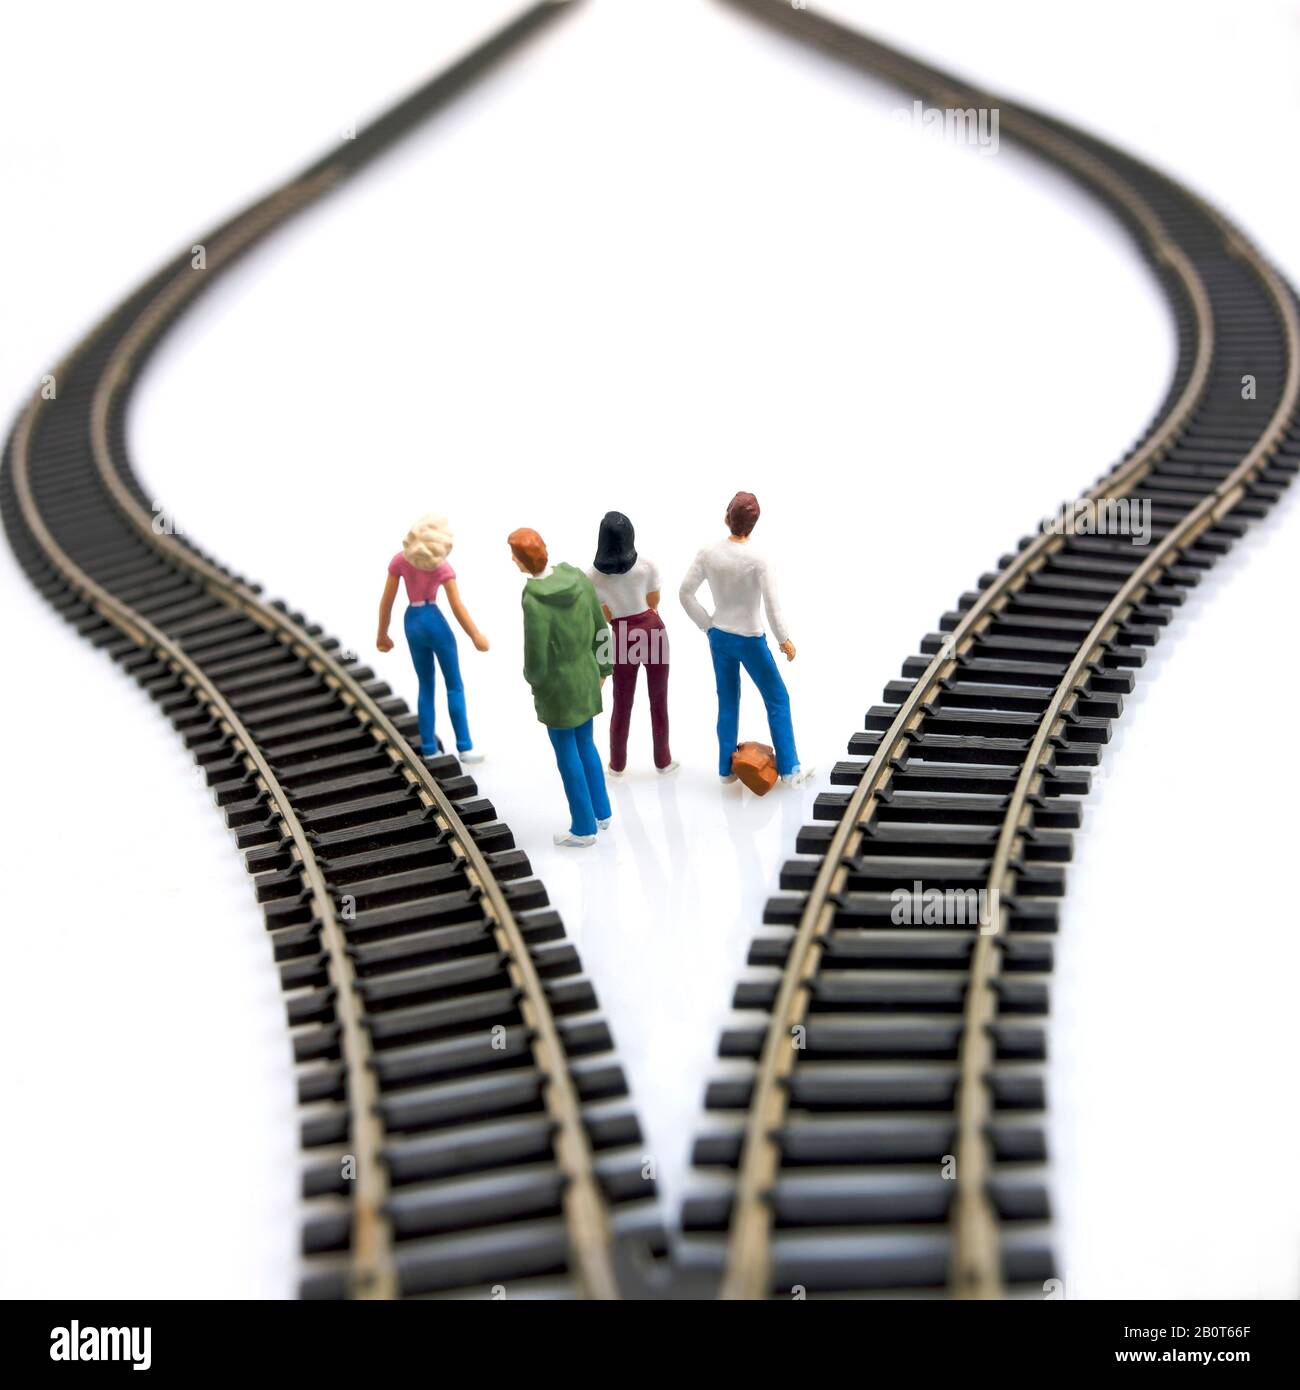 Couple, fou figurines between two tracks leading into different directions, symbolic image for making decisions, two figurines between two tracks lead Stock Photo